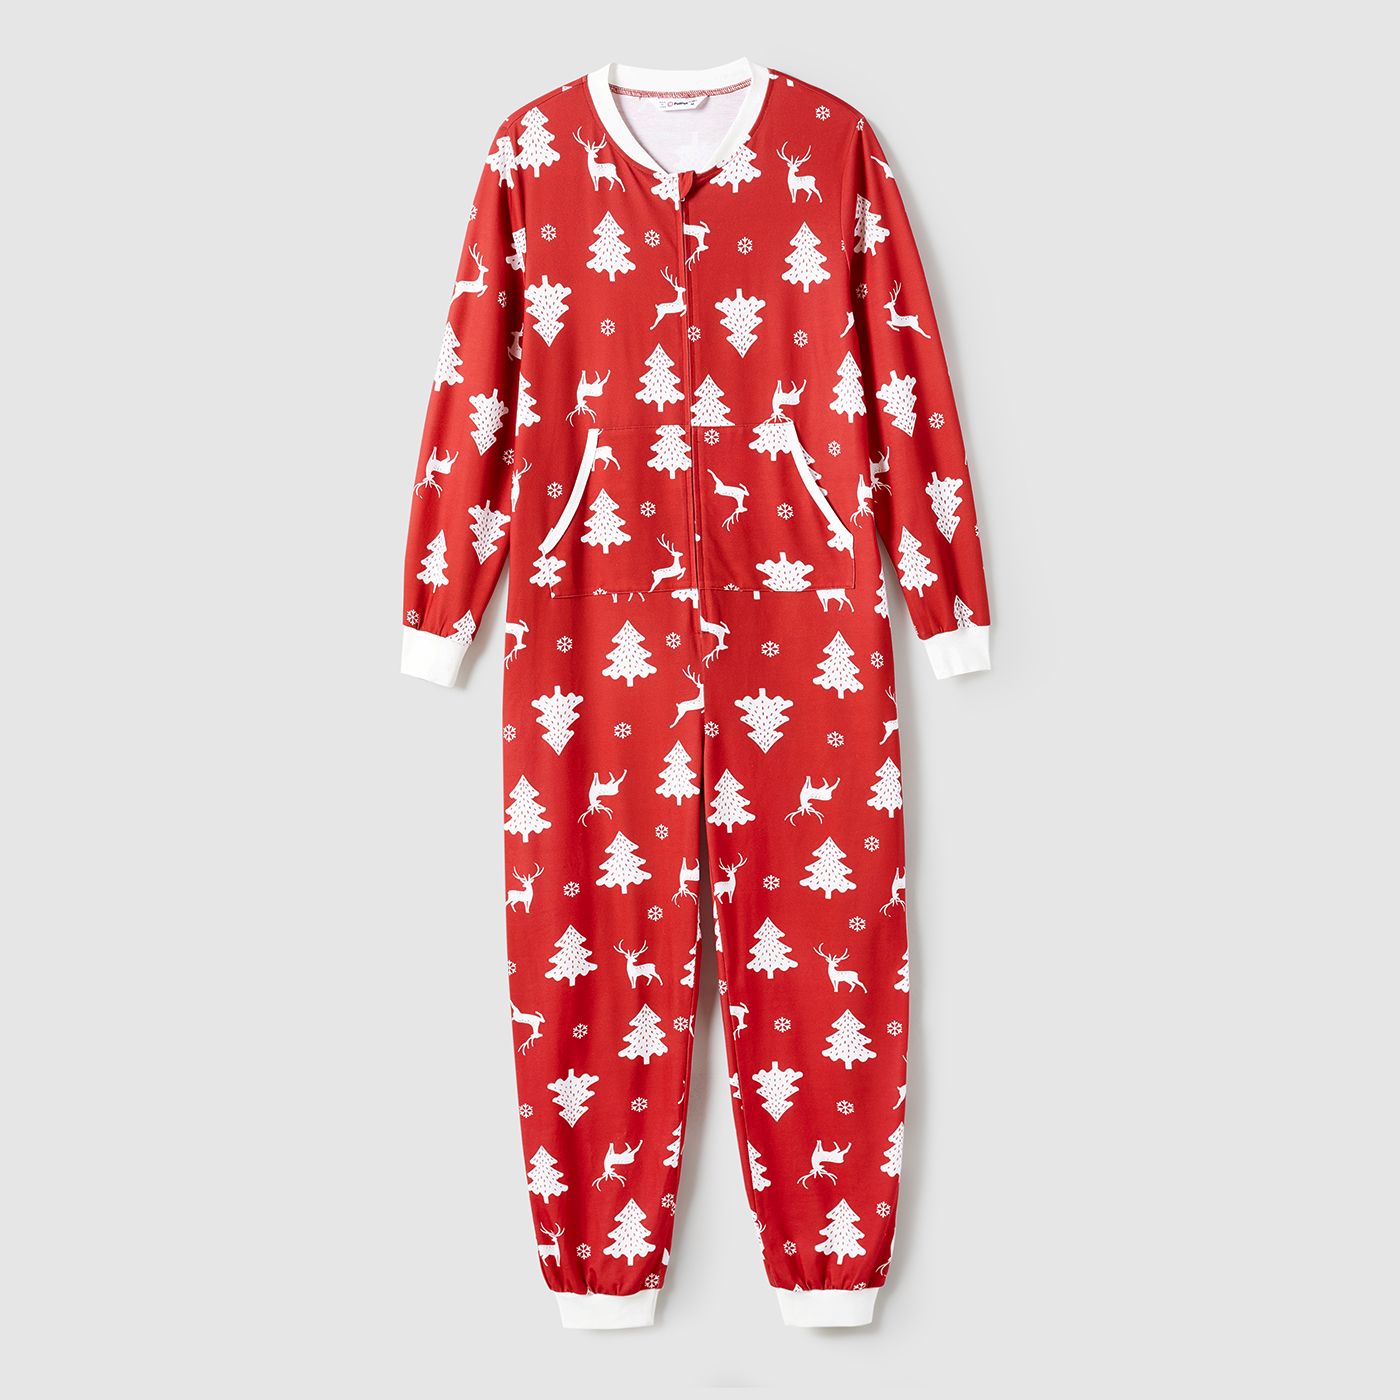 

Christmas Tree and Reindeer Allover Print Family Matching Long-sleeve Onesies Pajamas Sets (Flame Resistant)